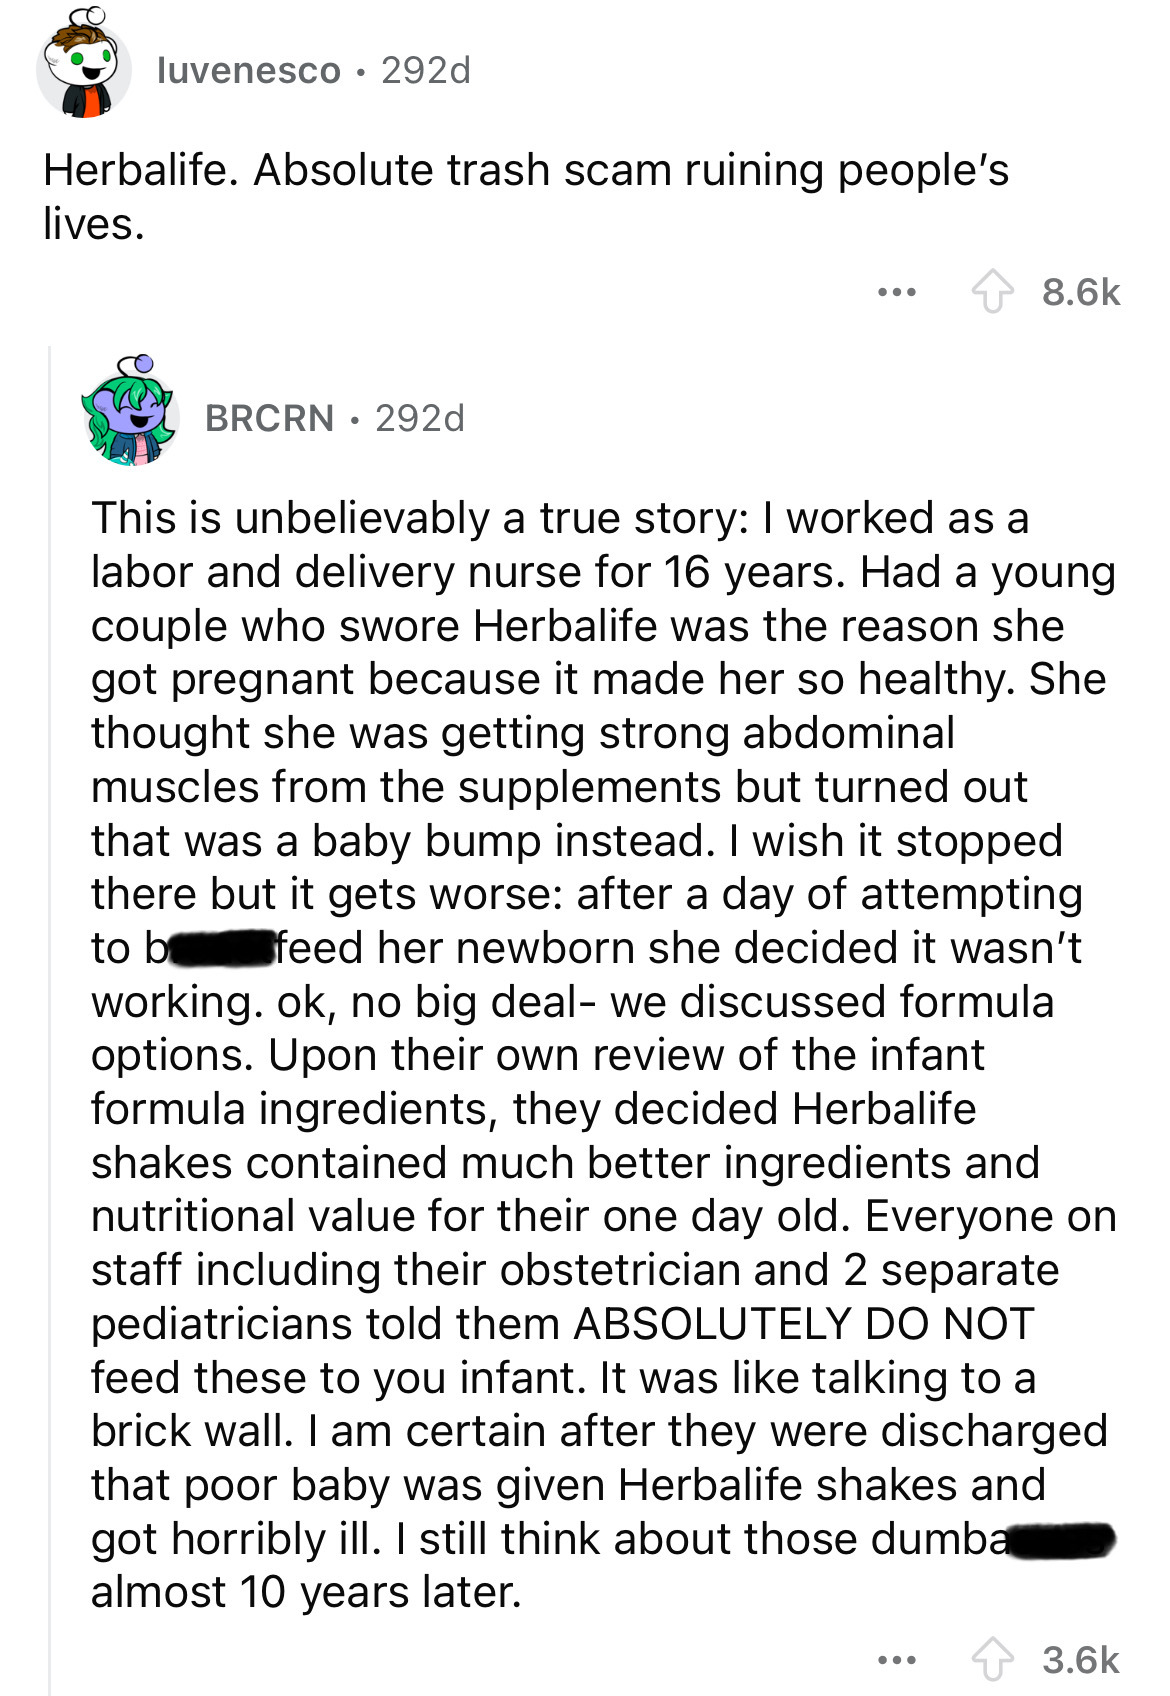 document - luvenesco. 292d Herbalife. Absolute trash scam ruining people's lives. Brcrn. 292d This is unbelievably a true story I worked as a labor and delivery nurse for 16 years. Had a young couple who swore Herbalife was the reason she got pregnant bec